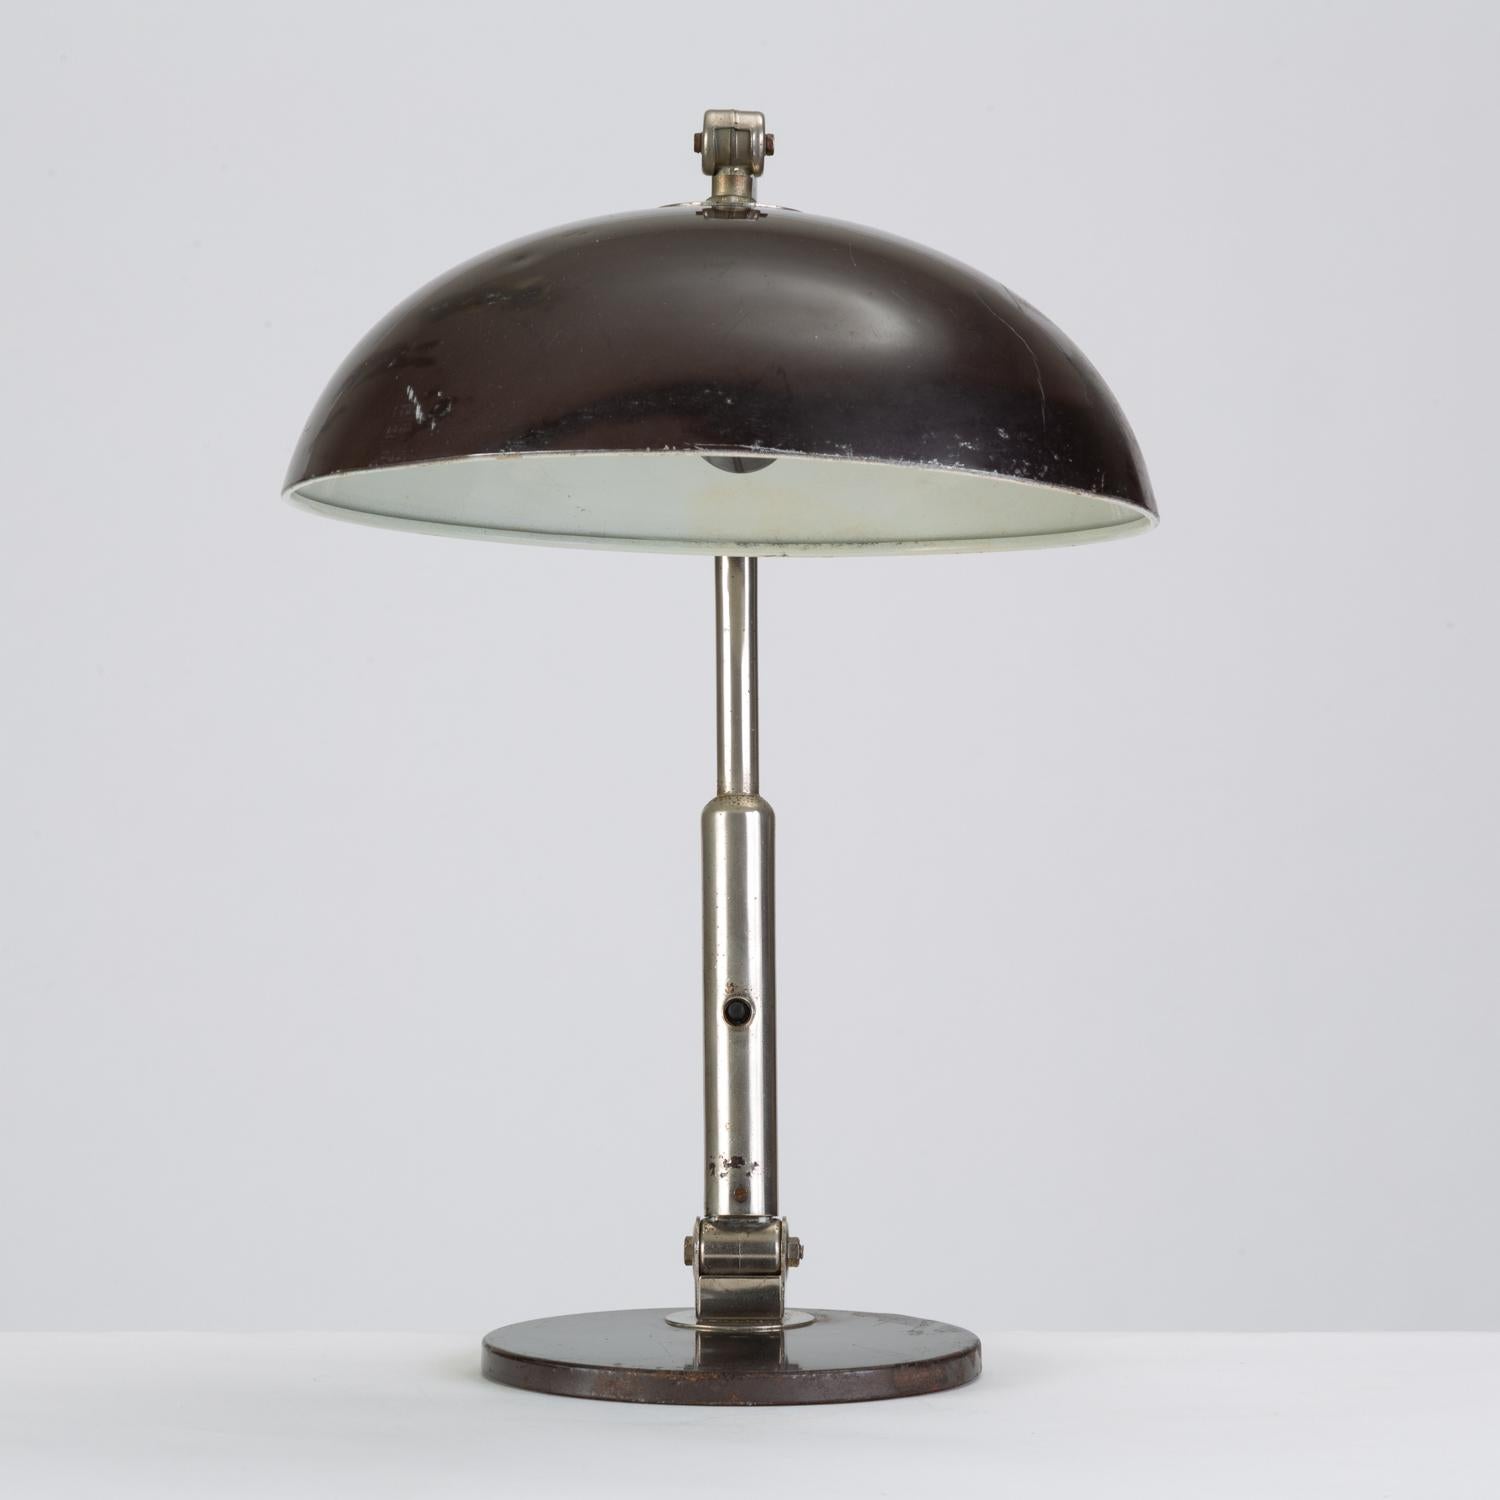 A rounded table lamp designed in 1932 by Herman Theodoor Jan Anthoin Busquet, lead designer for Zeist-based lamp importer and manufacturer, Hala. Influenced by De Stijl and Bauhaus styles, Busquet espoused a modernism that was playful and highly